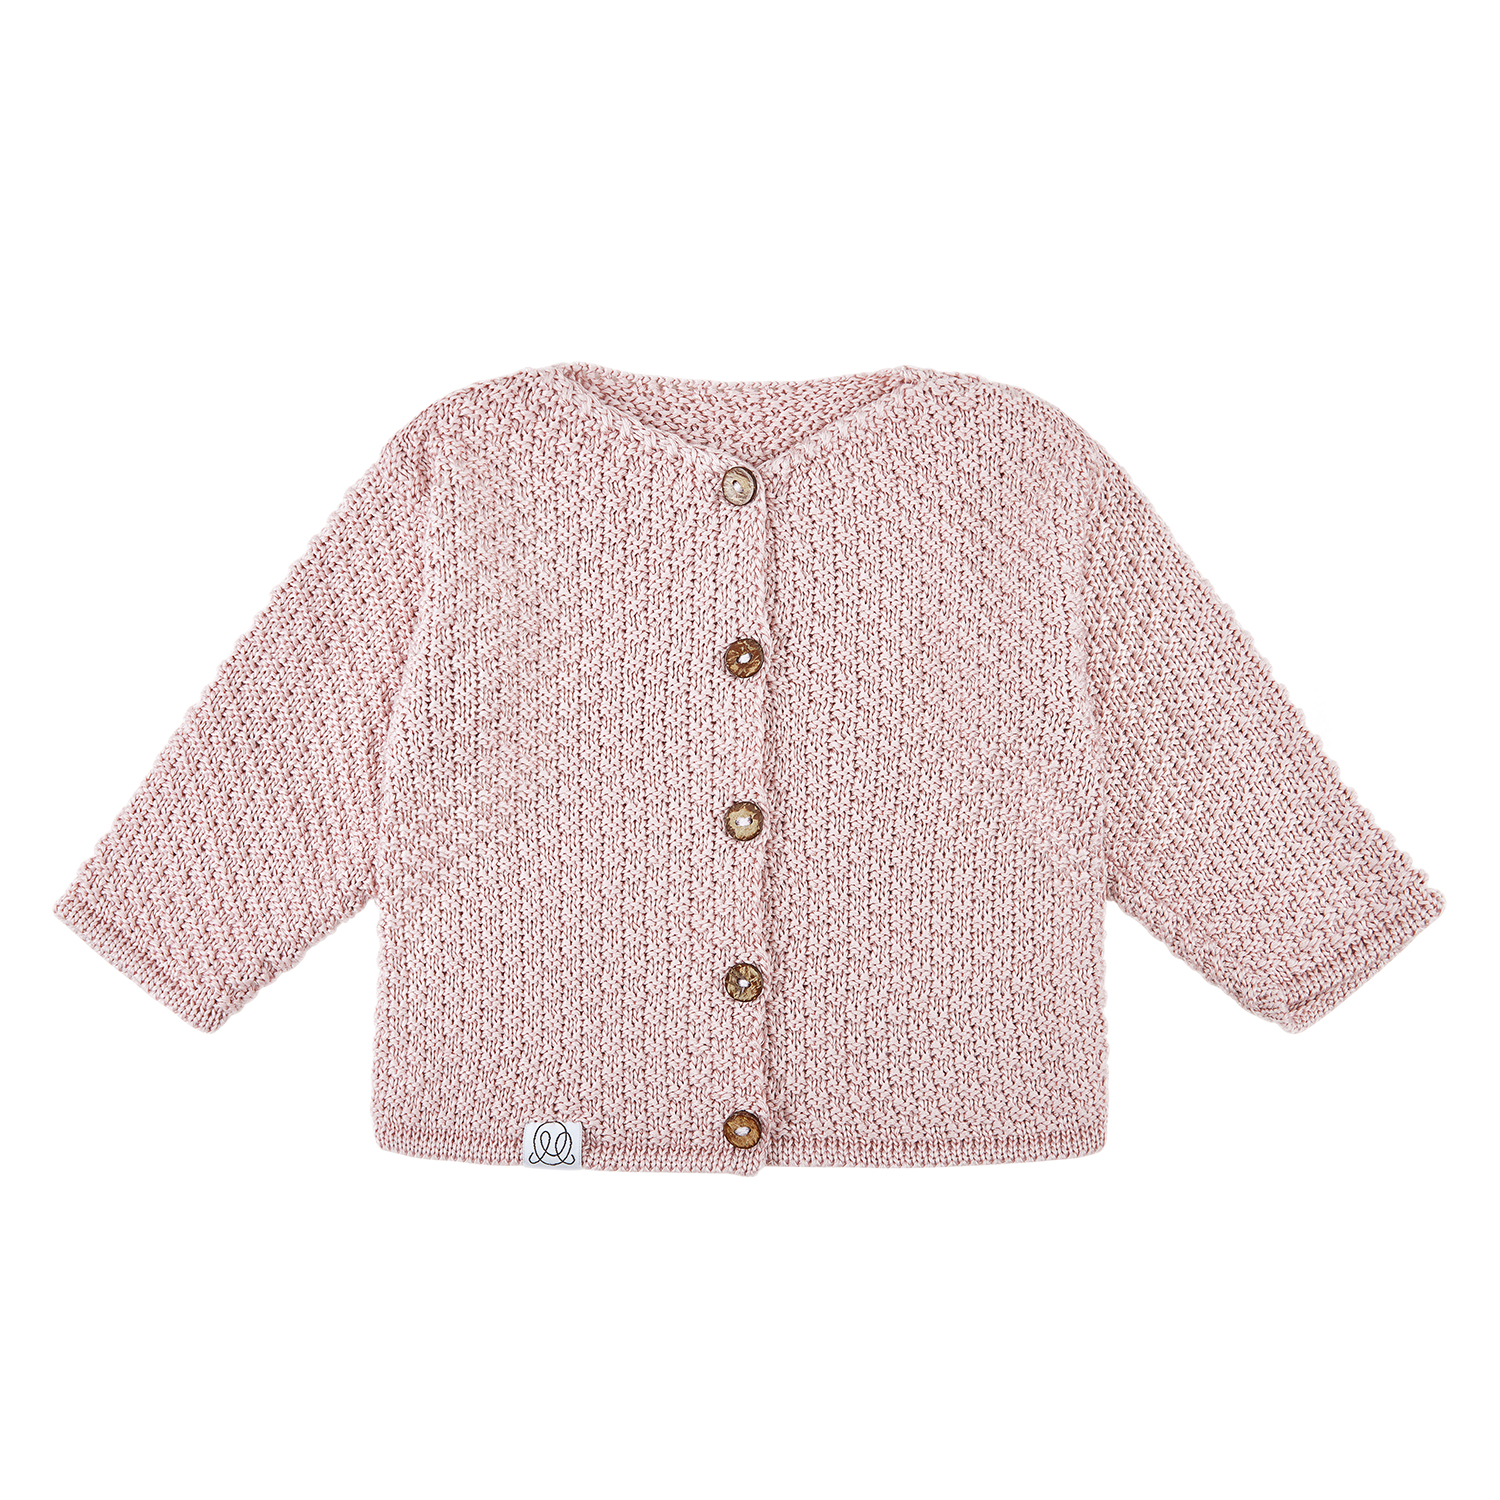 Bamboo sweater - dusty pink